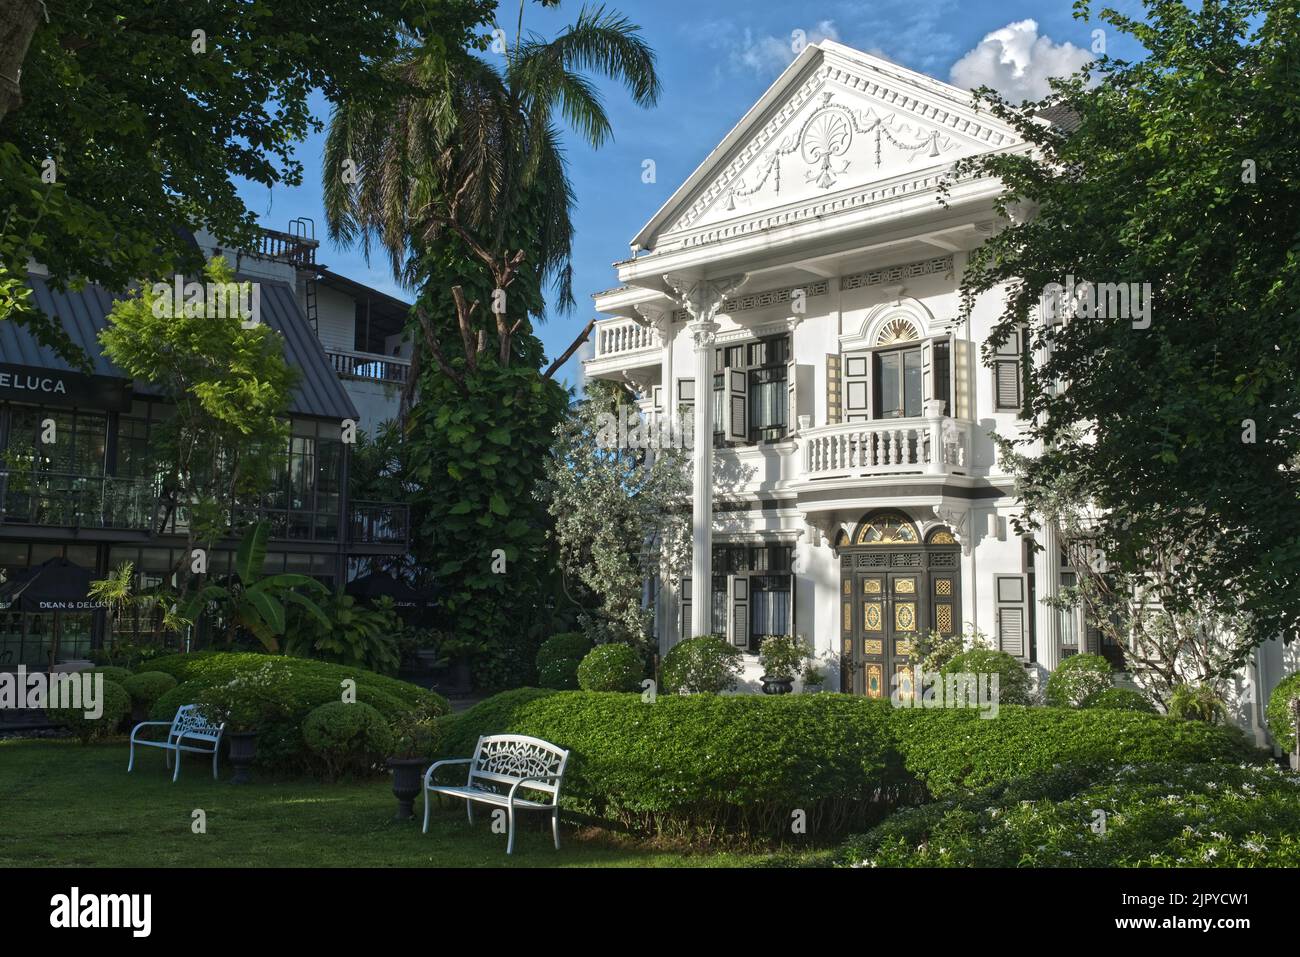 A splendid old Chinese merchant's villa built in Sino-Portuguese or Peranakan style, in Yaowarat Road in the Old Town area of Phuket Town, Thailand Stock Photo